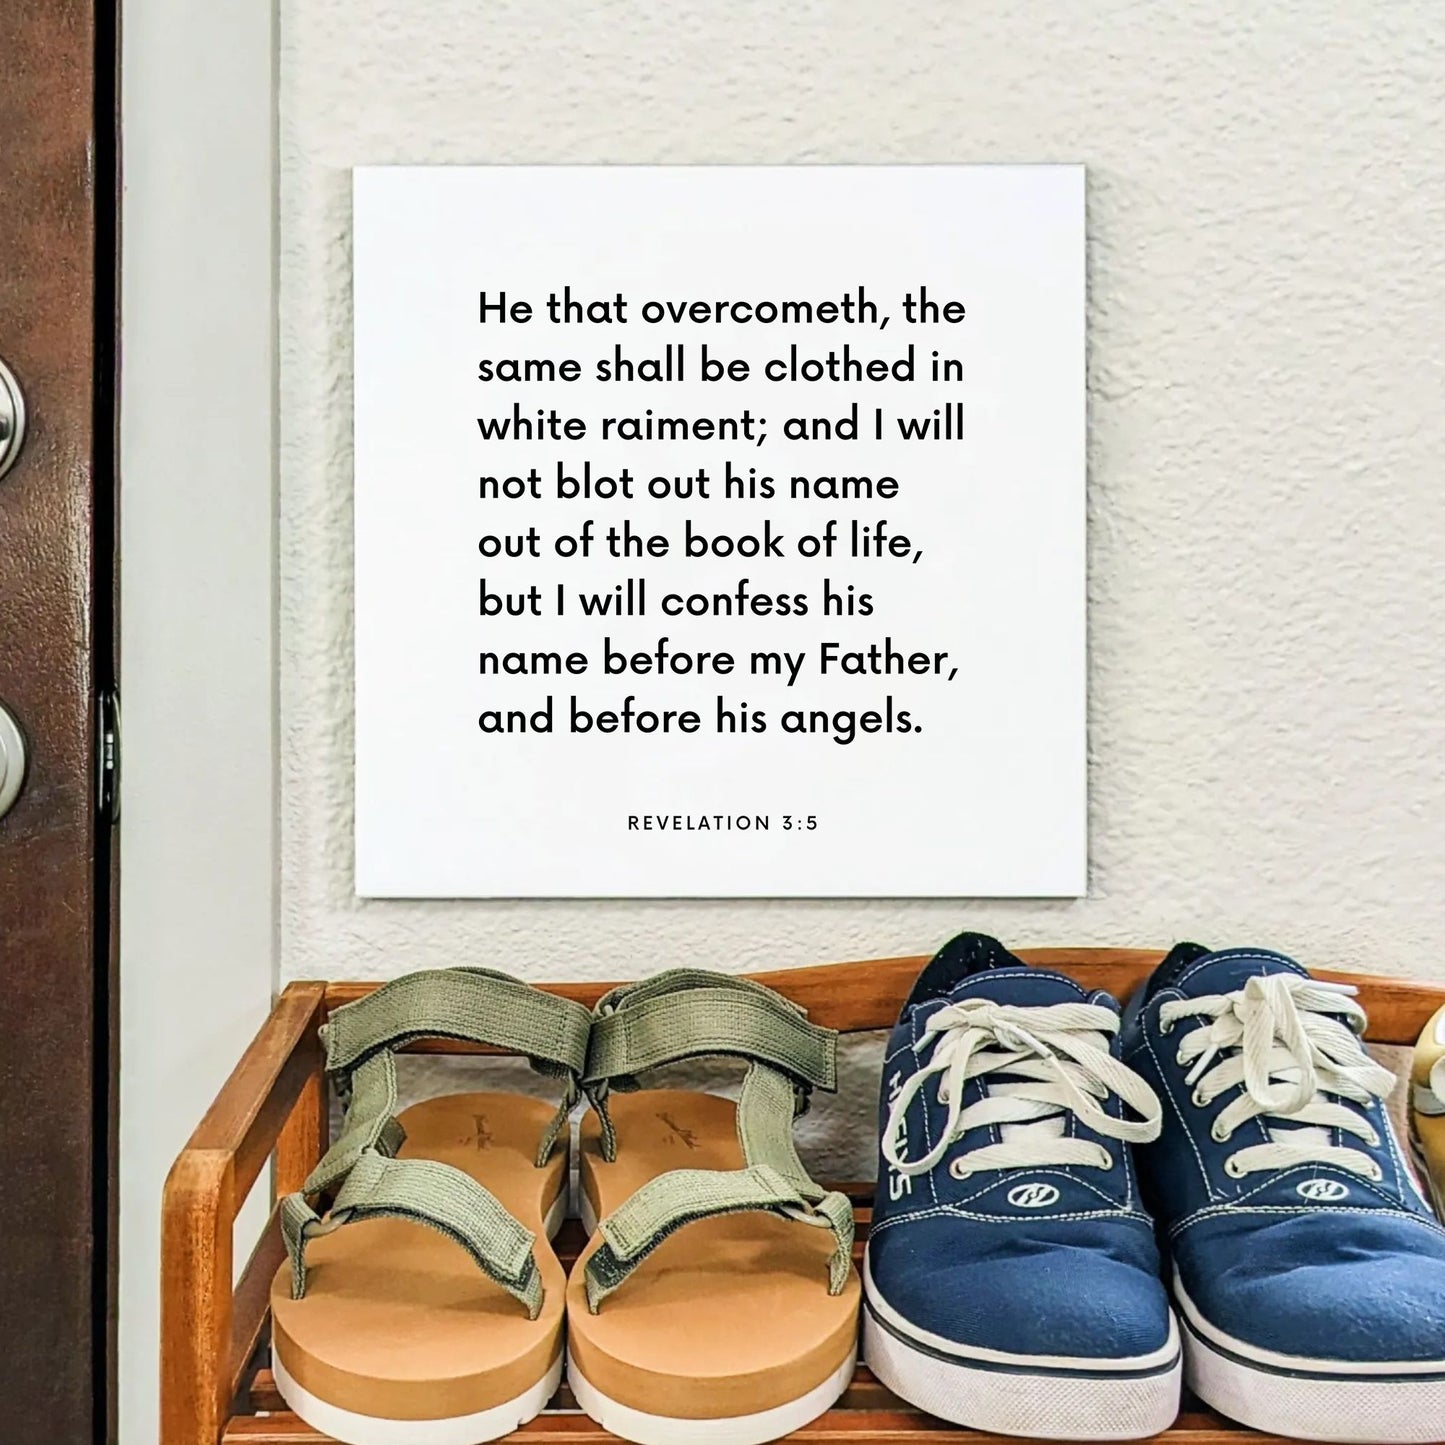 Shoes mouting of the scripture tile for Revelation 3:5 - "I will confess his name before my Father"